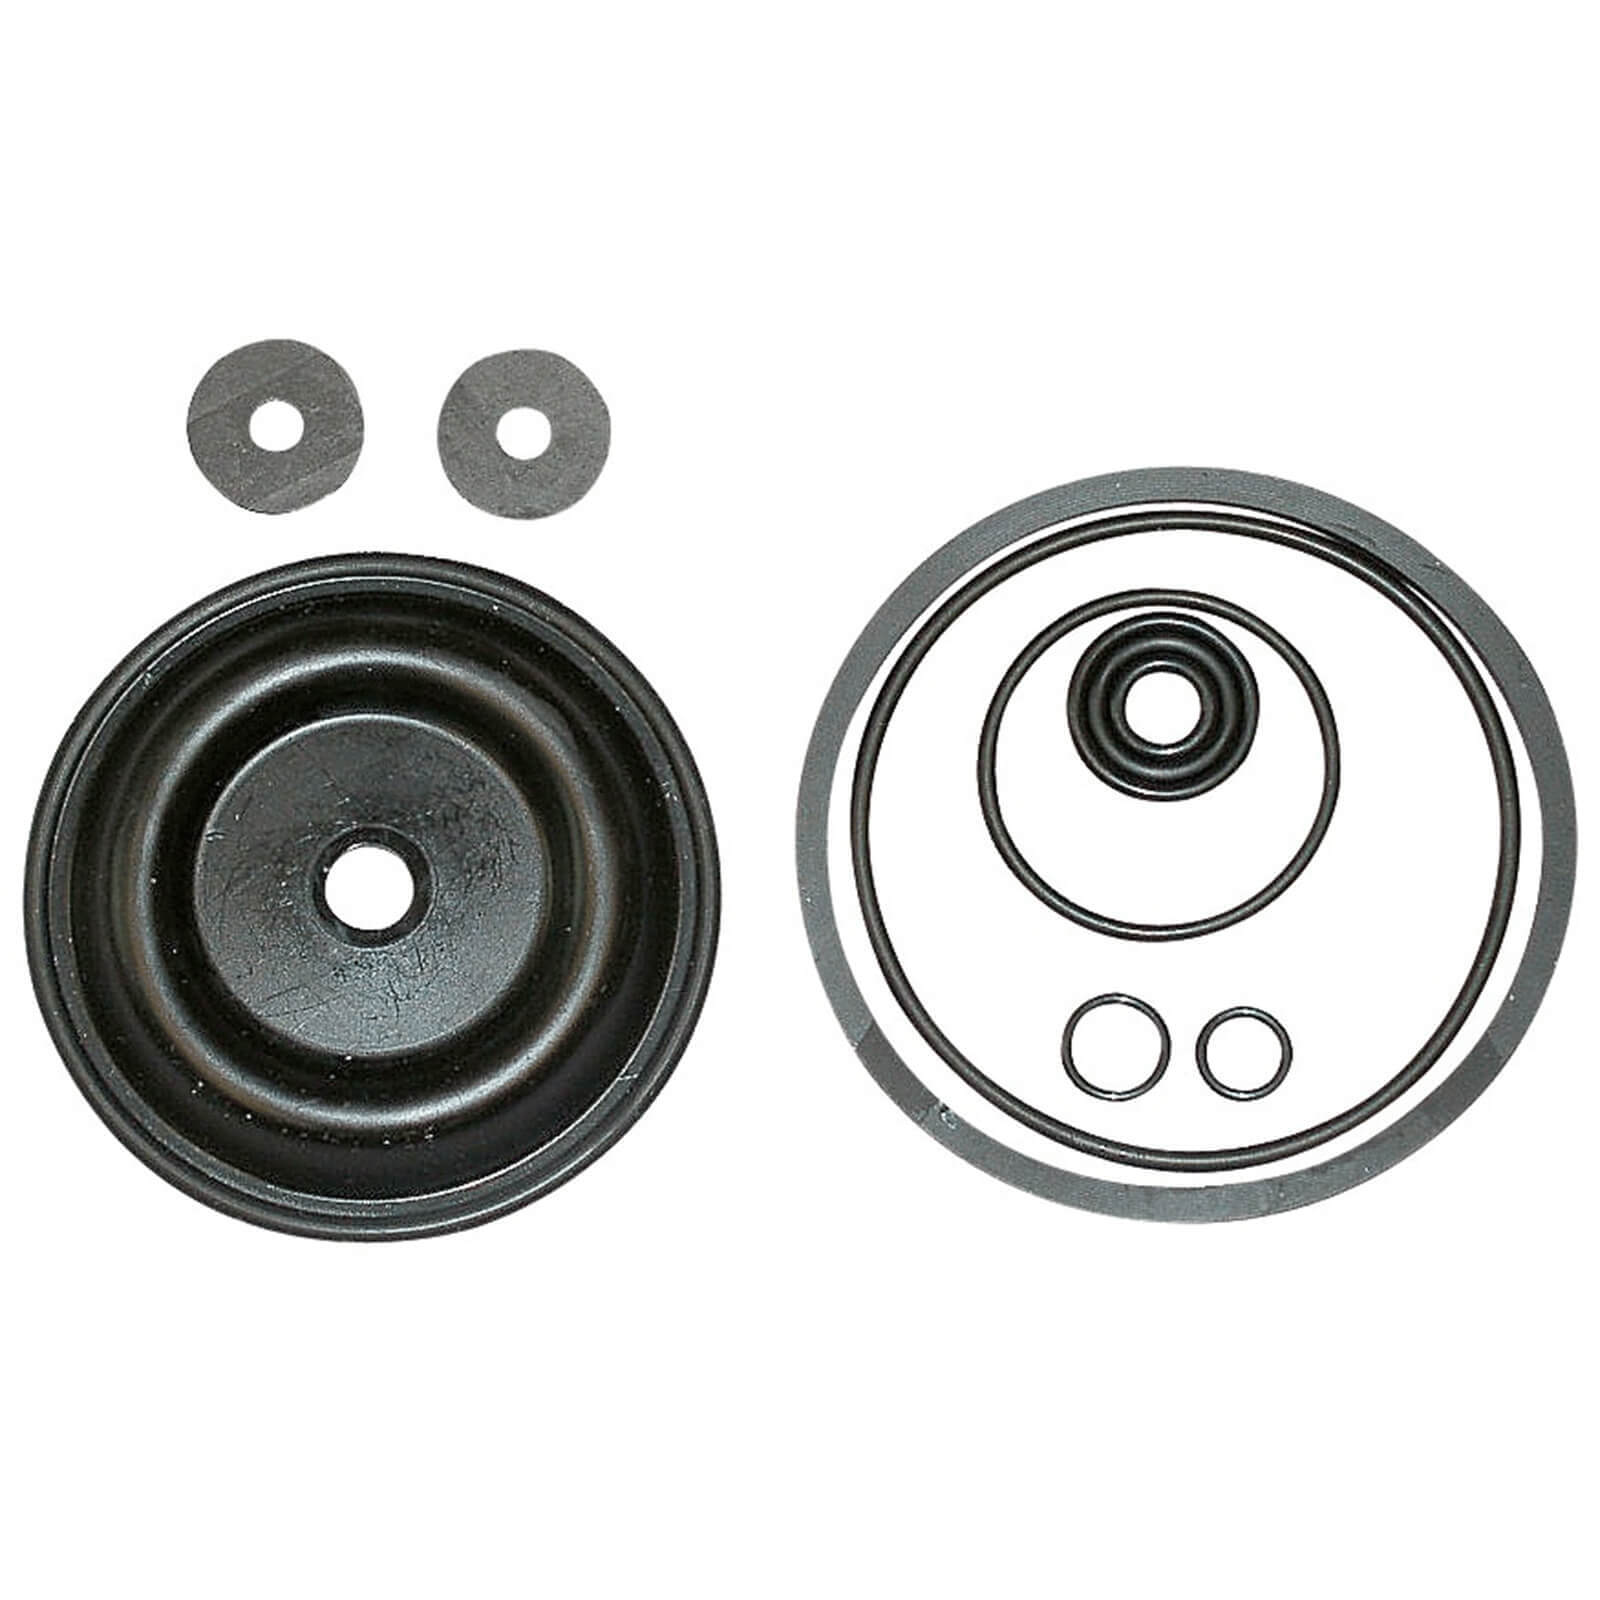 Image of Solo FKM Gasket Kit 473D and 475 Pressure Sprayers